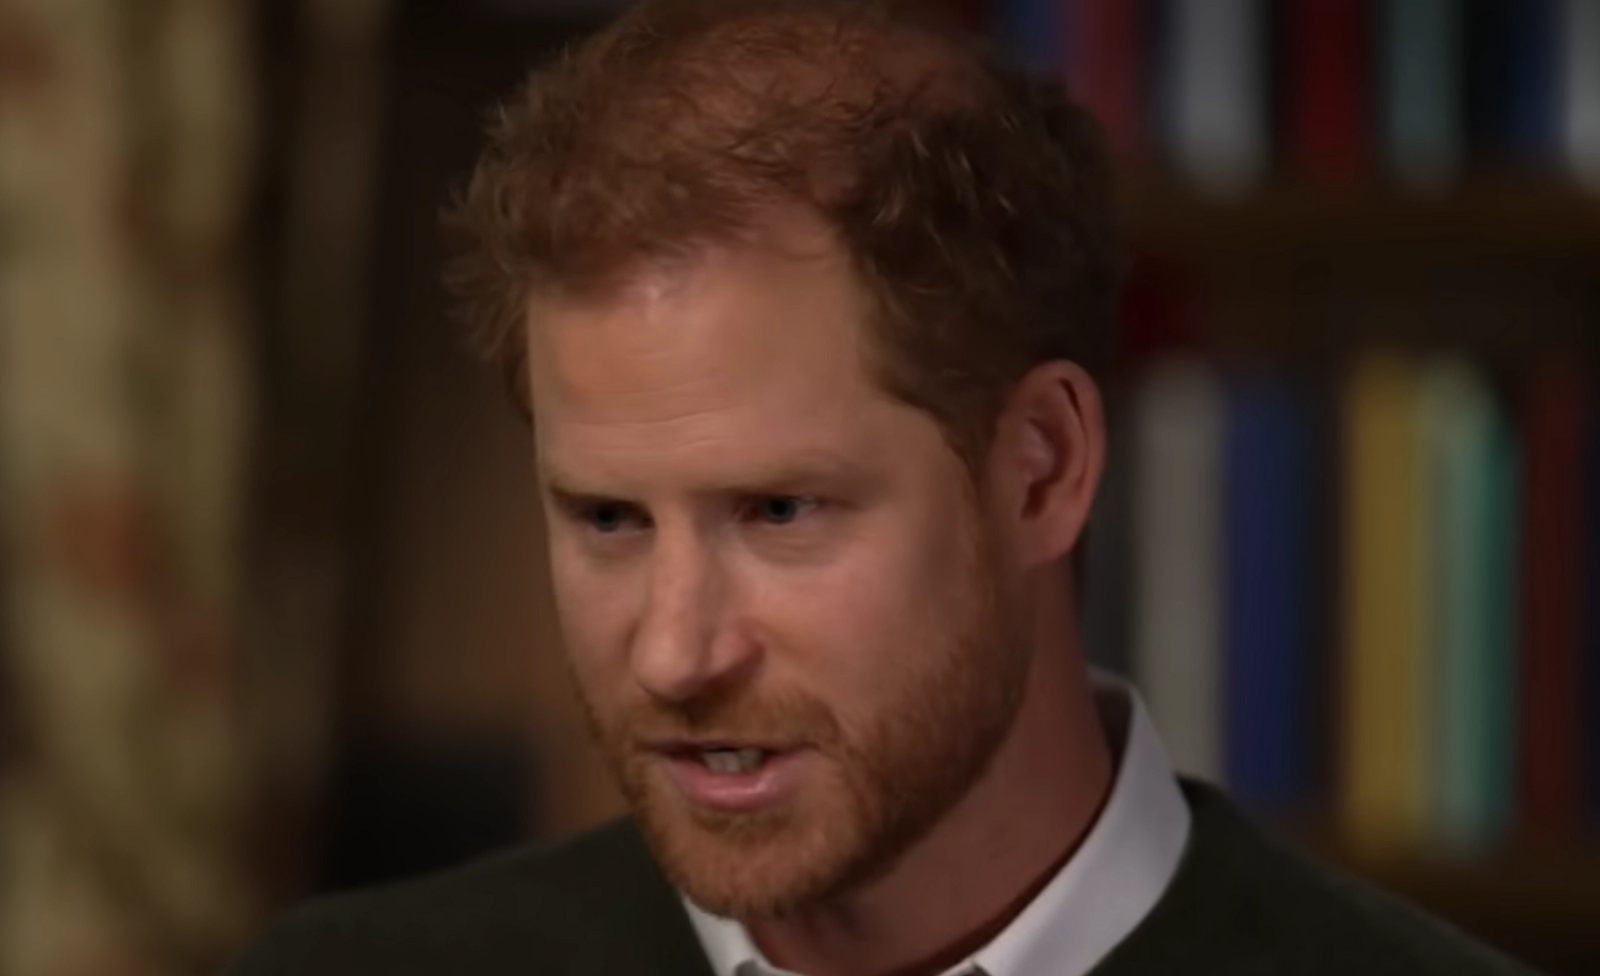 prince-william-prince-harry-revelation-royal-expert-claims-king-charles-sons-have-not-spoken-relationship-still-strained-ahead-of-coronation